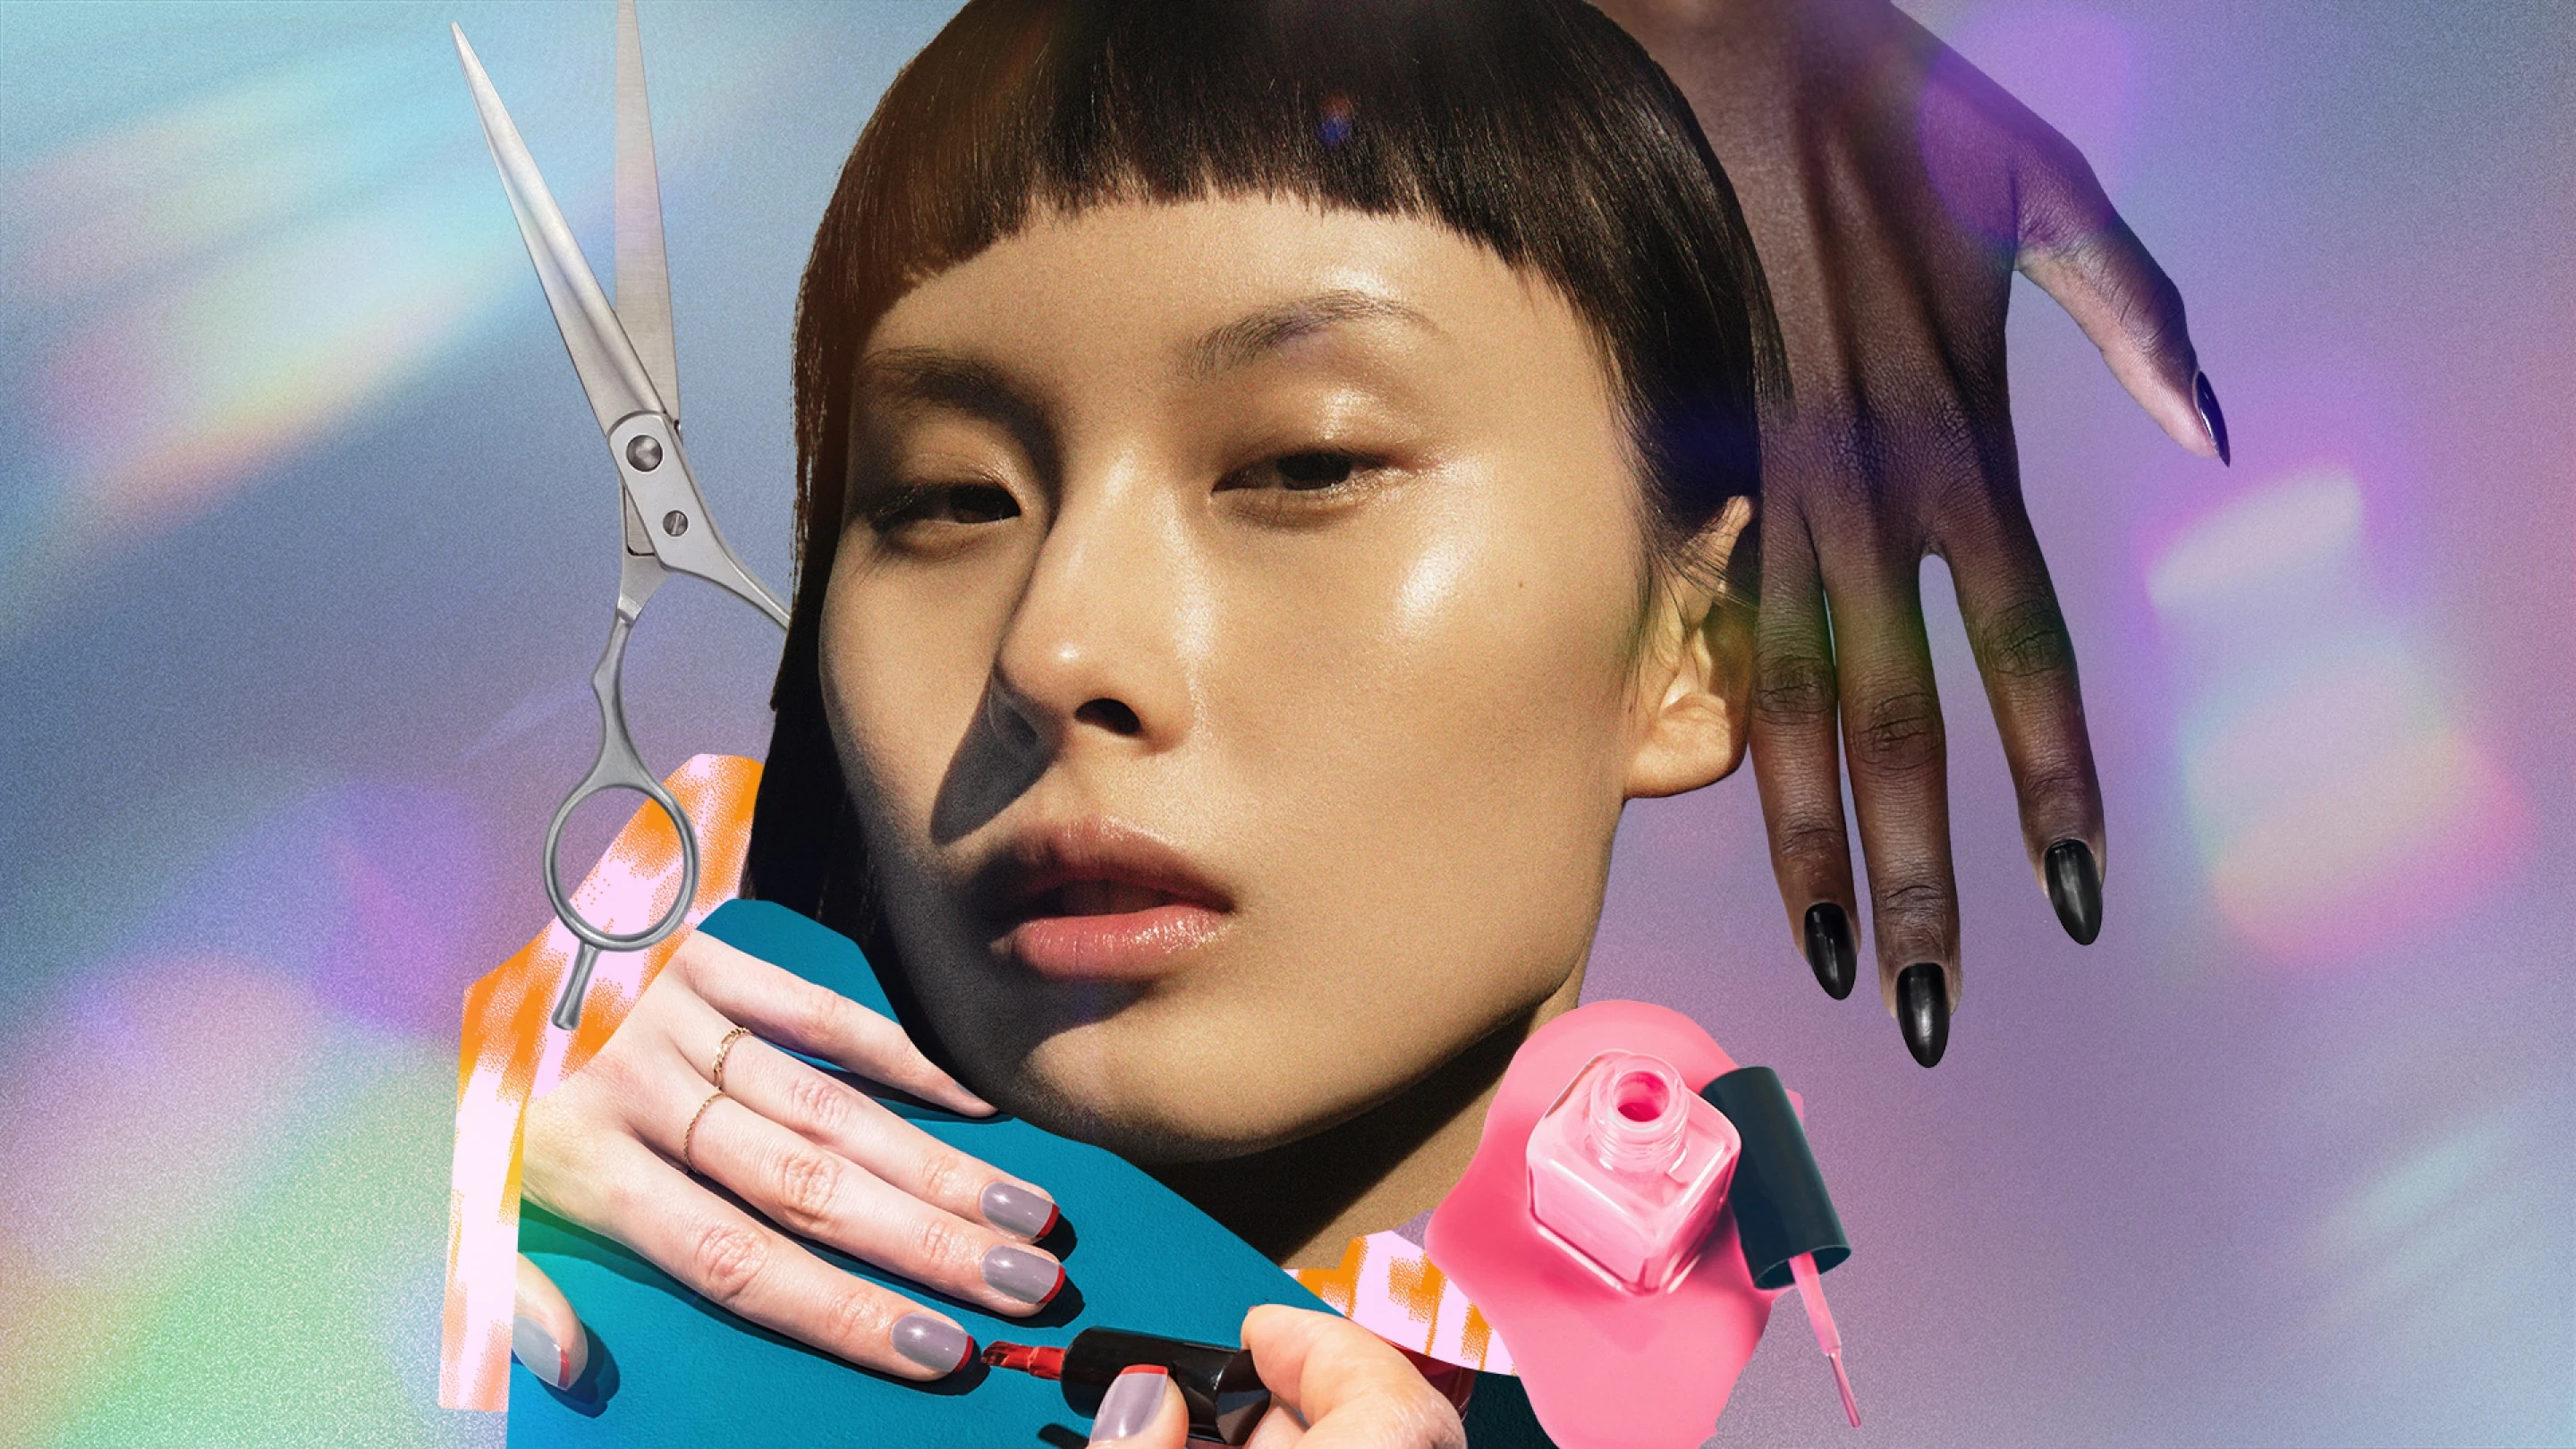 Collage of various examples of micro beauty styles like mini bangs on an Asian woman, short manicures on two different sets of hands and artistically-placed hair shears. 